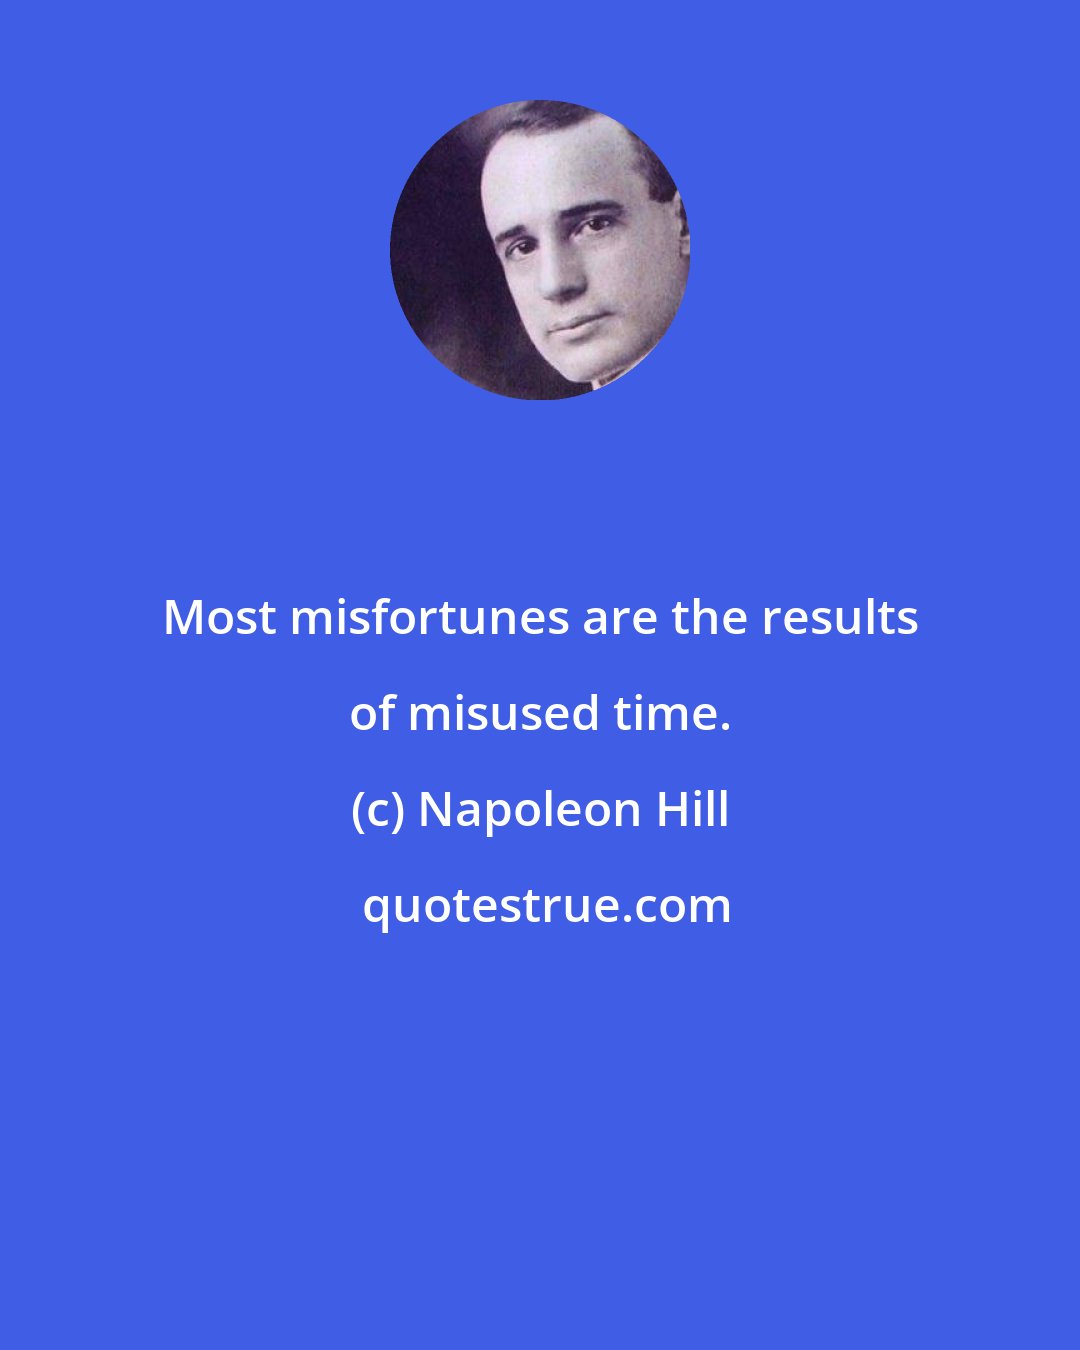 Napoleon Hill: Most misfortunes are the results of misused time.